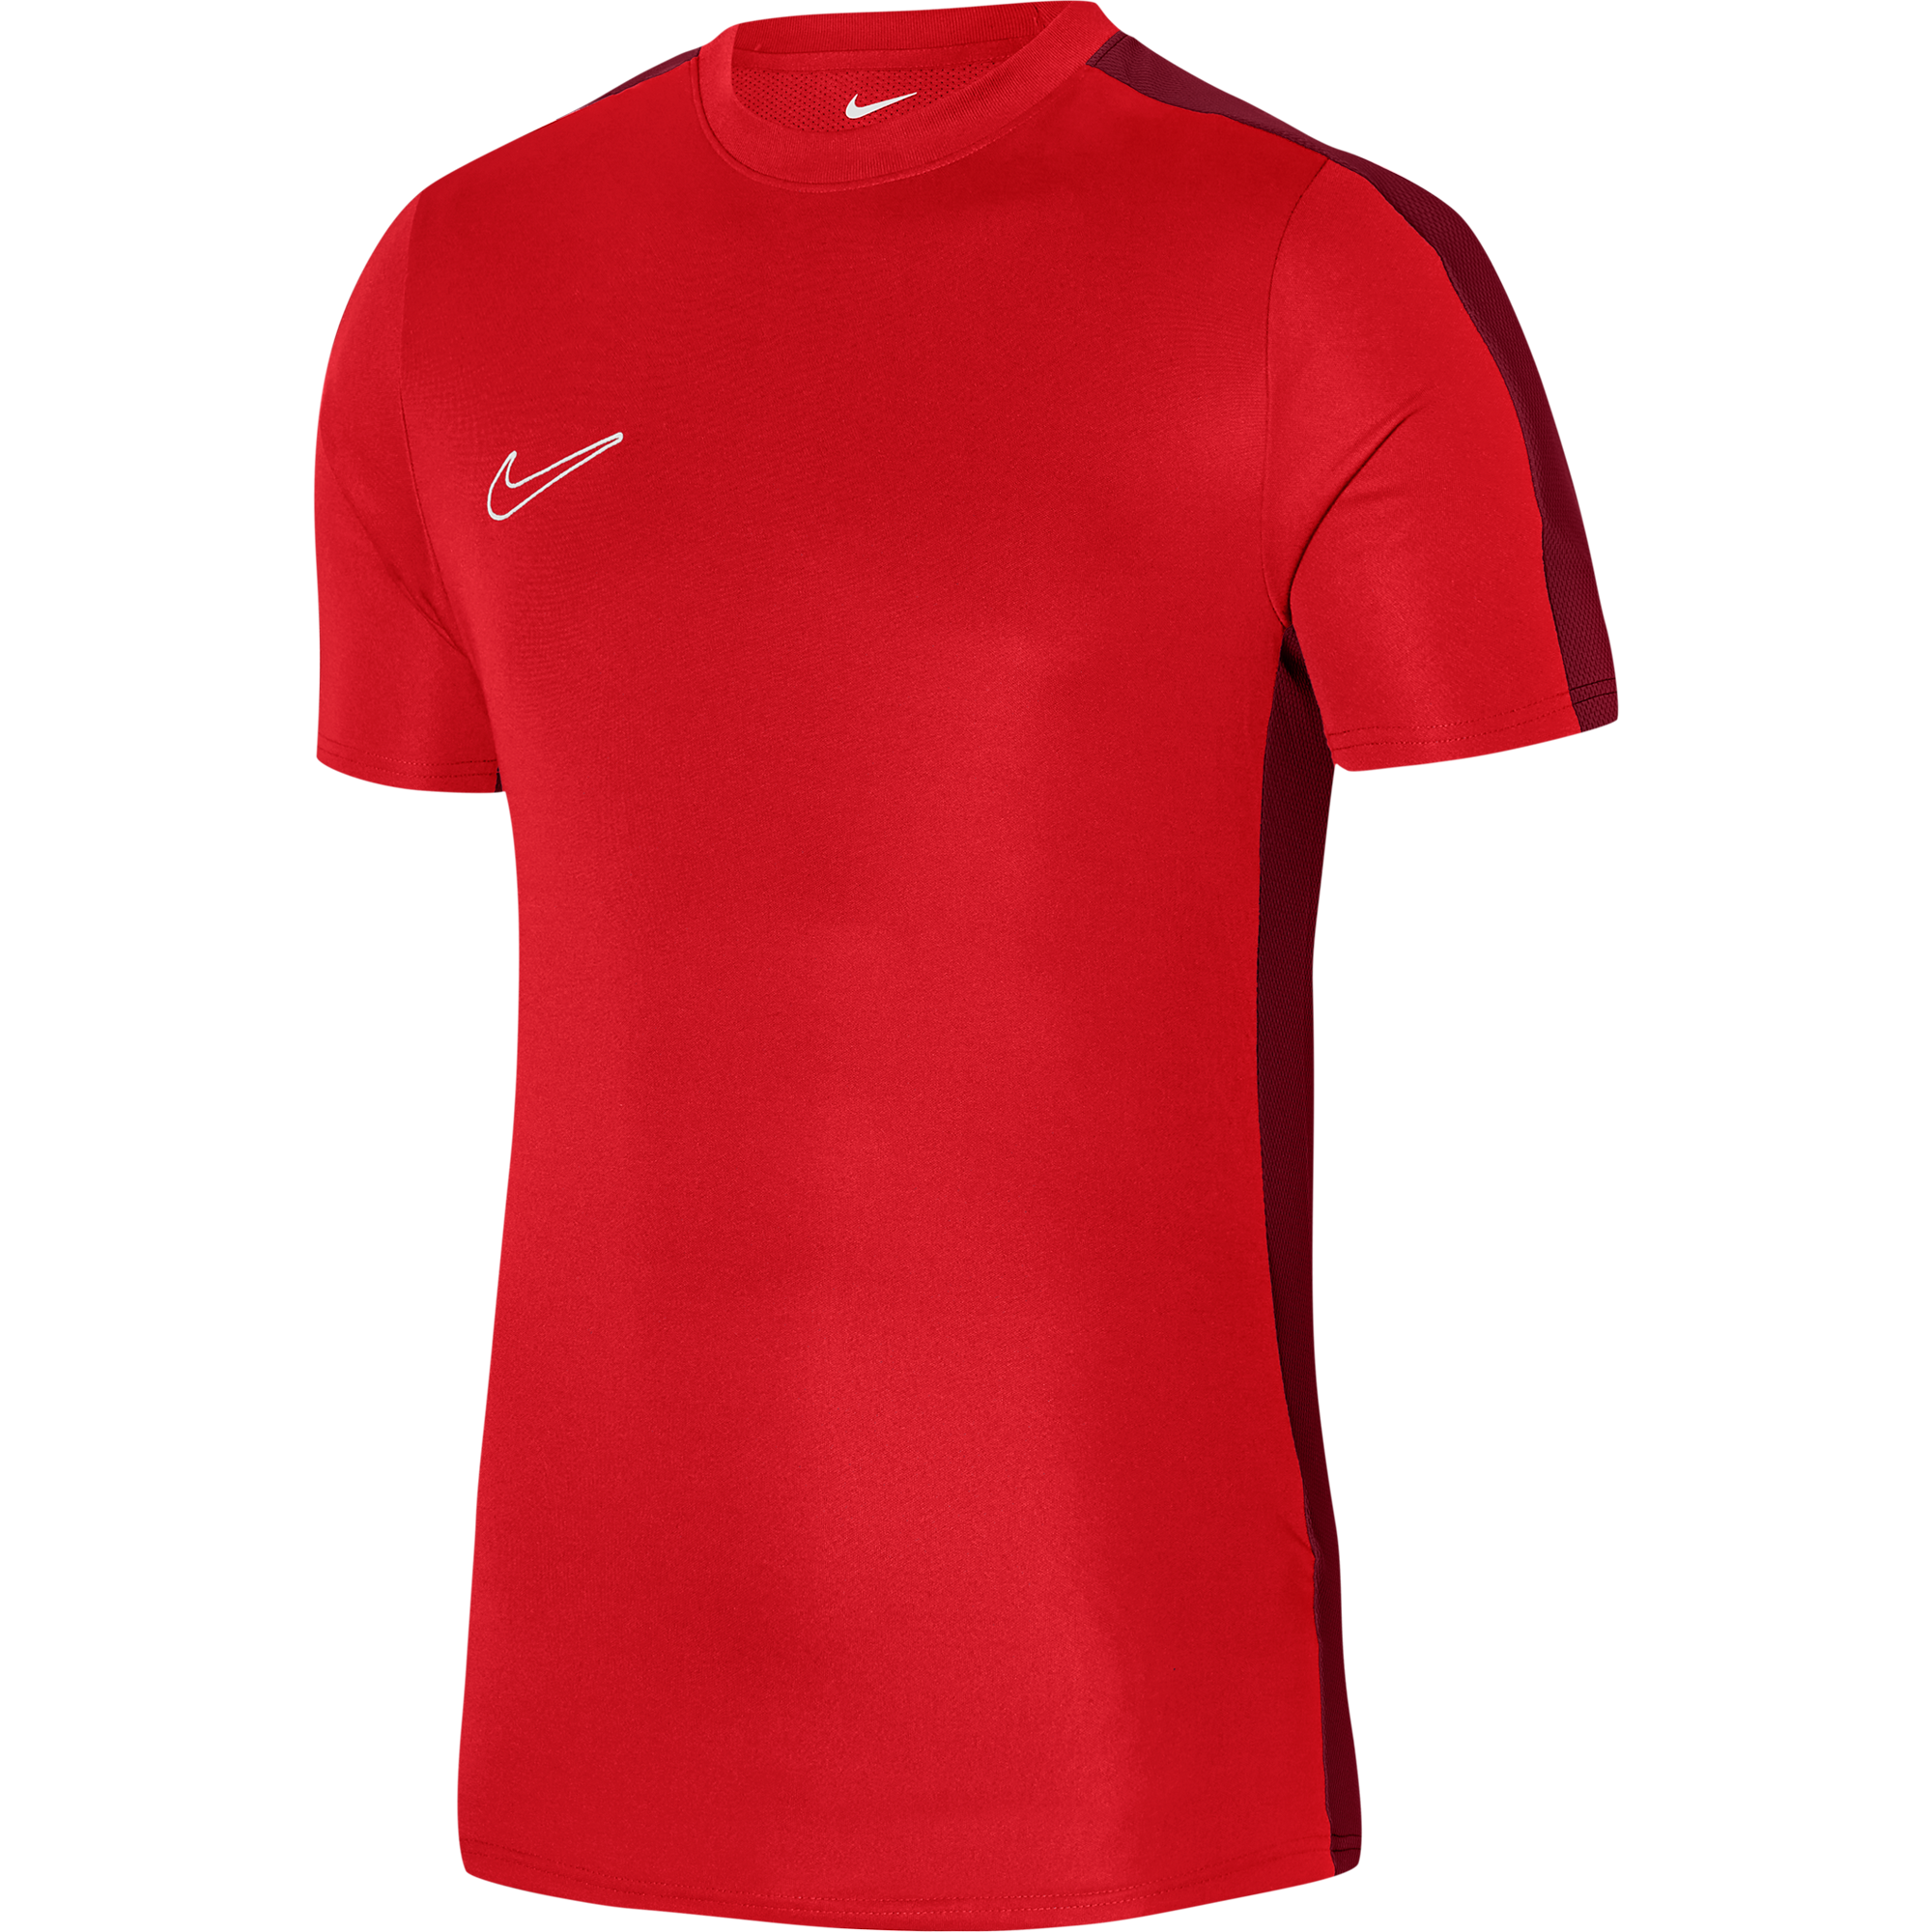 Nike Dri FIT Short Sleeve Shirt in University Red/Gym Red/White